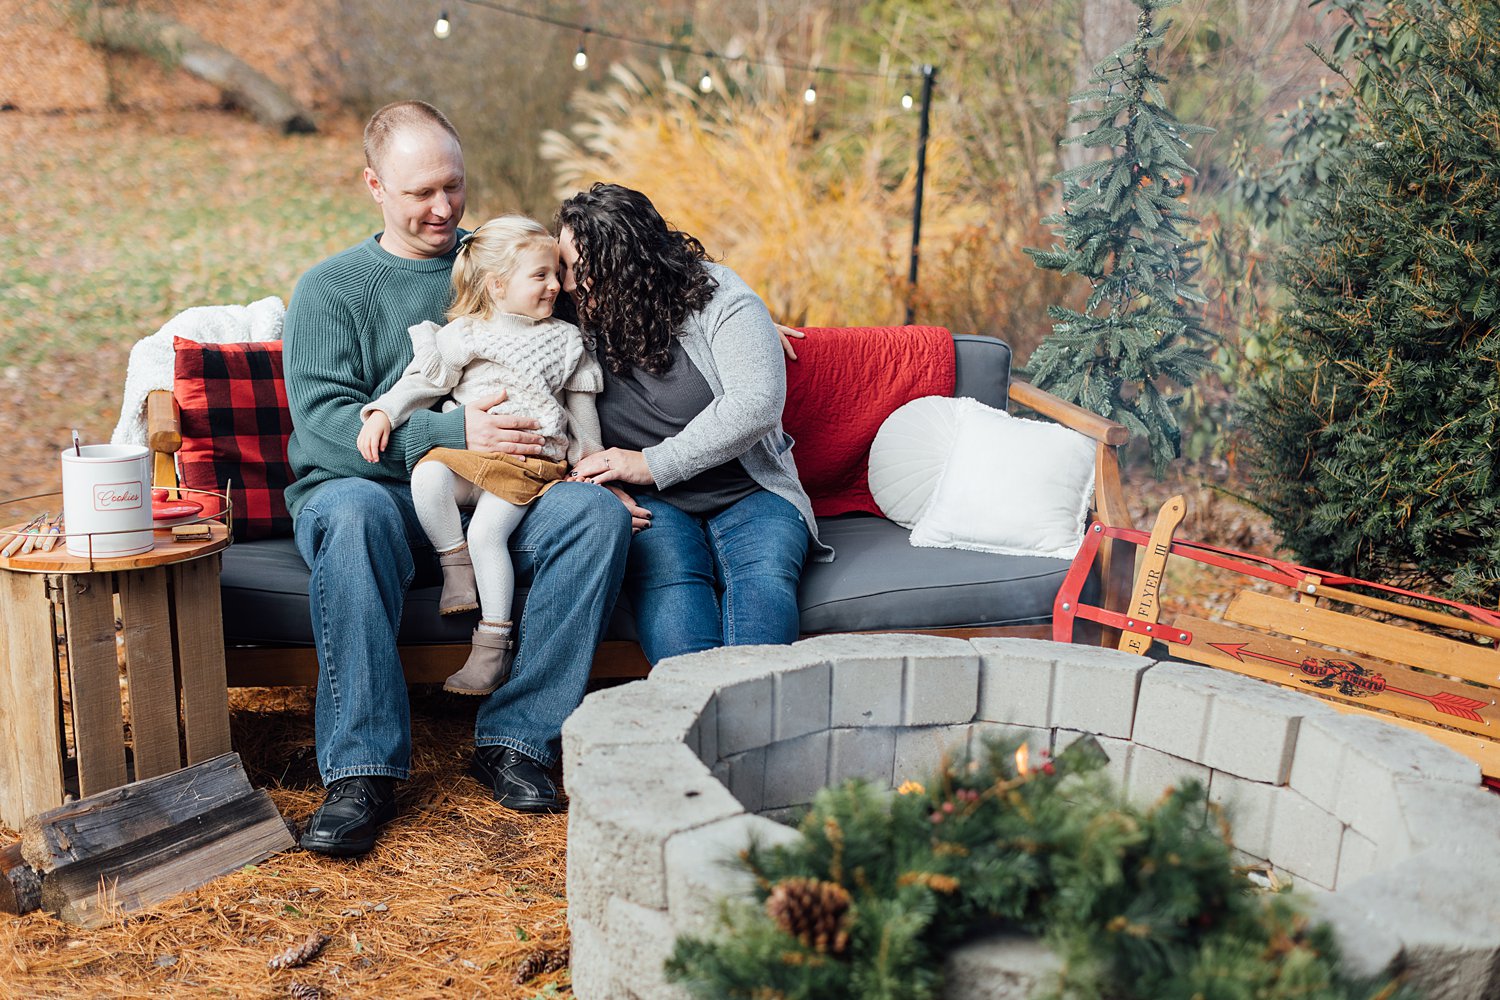 Fireside Collingswood Mini Sessions - South Jersey Family Photographer - Alison Dunn Photography photo